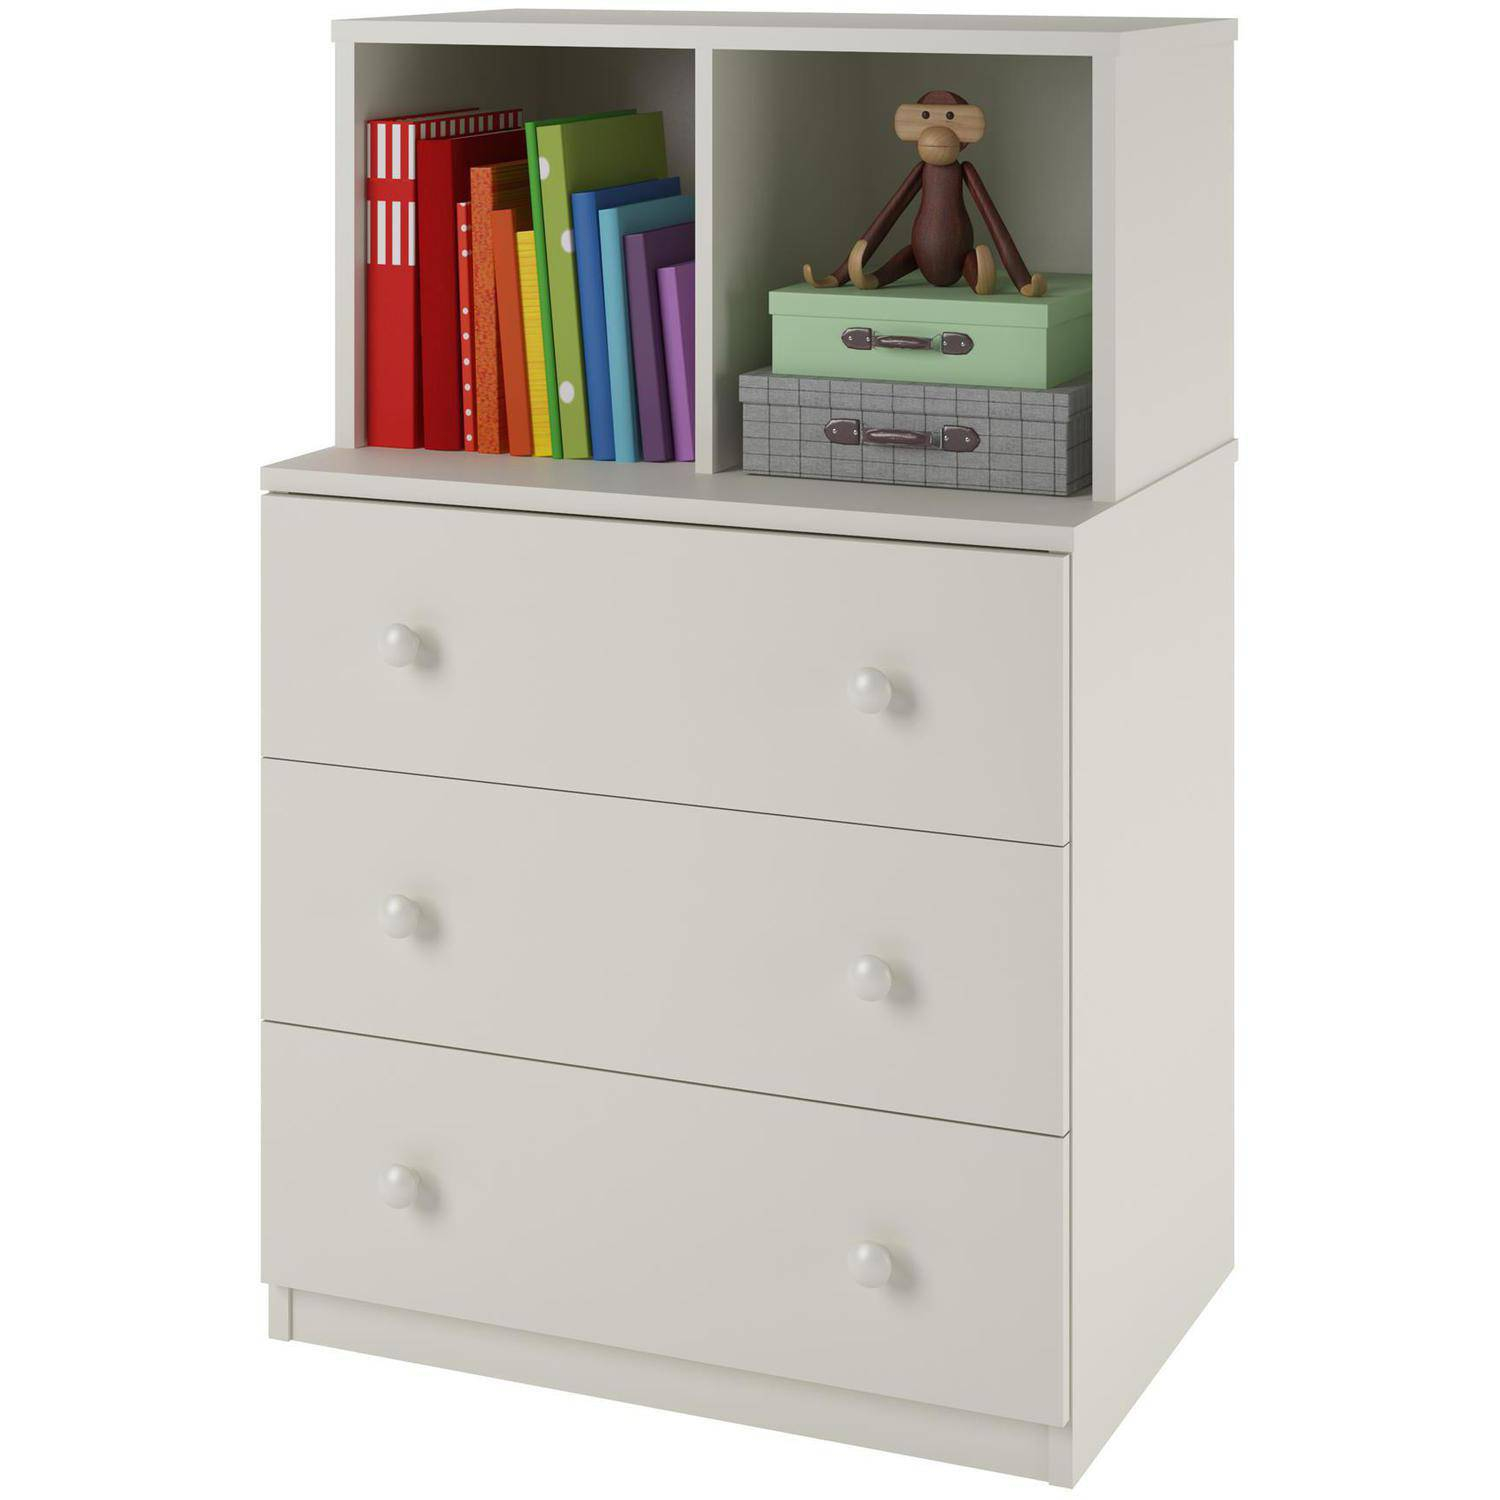 Details About 3 Drawer Dresser Cub Storage Bins White Wood Bookcase Toy Chest Shelf Cabinet within proportions 1500 X 1500